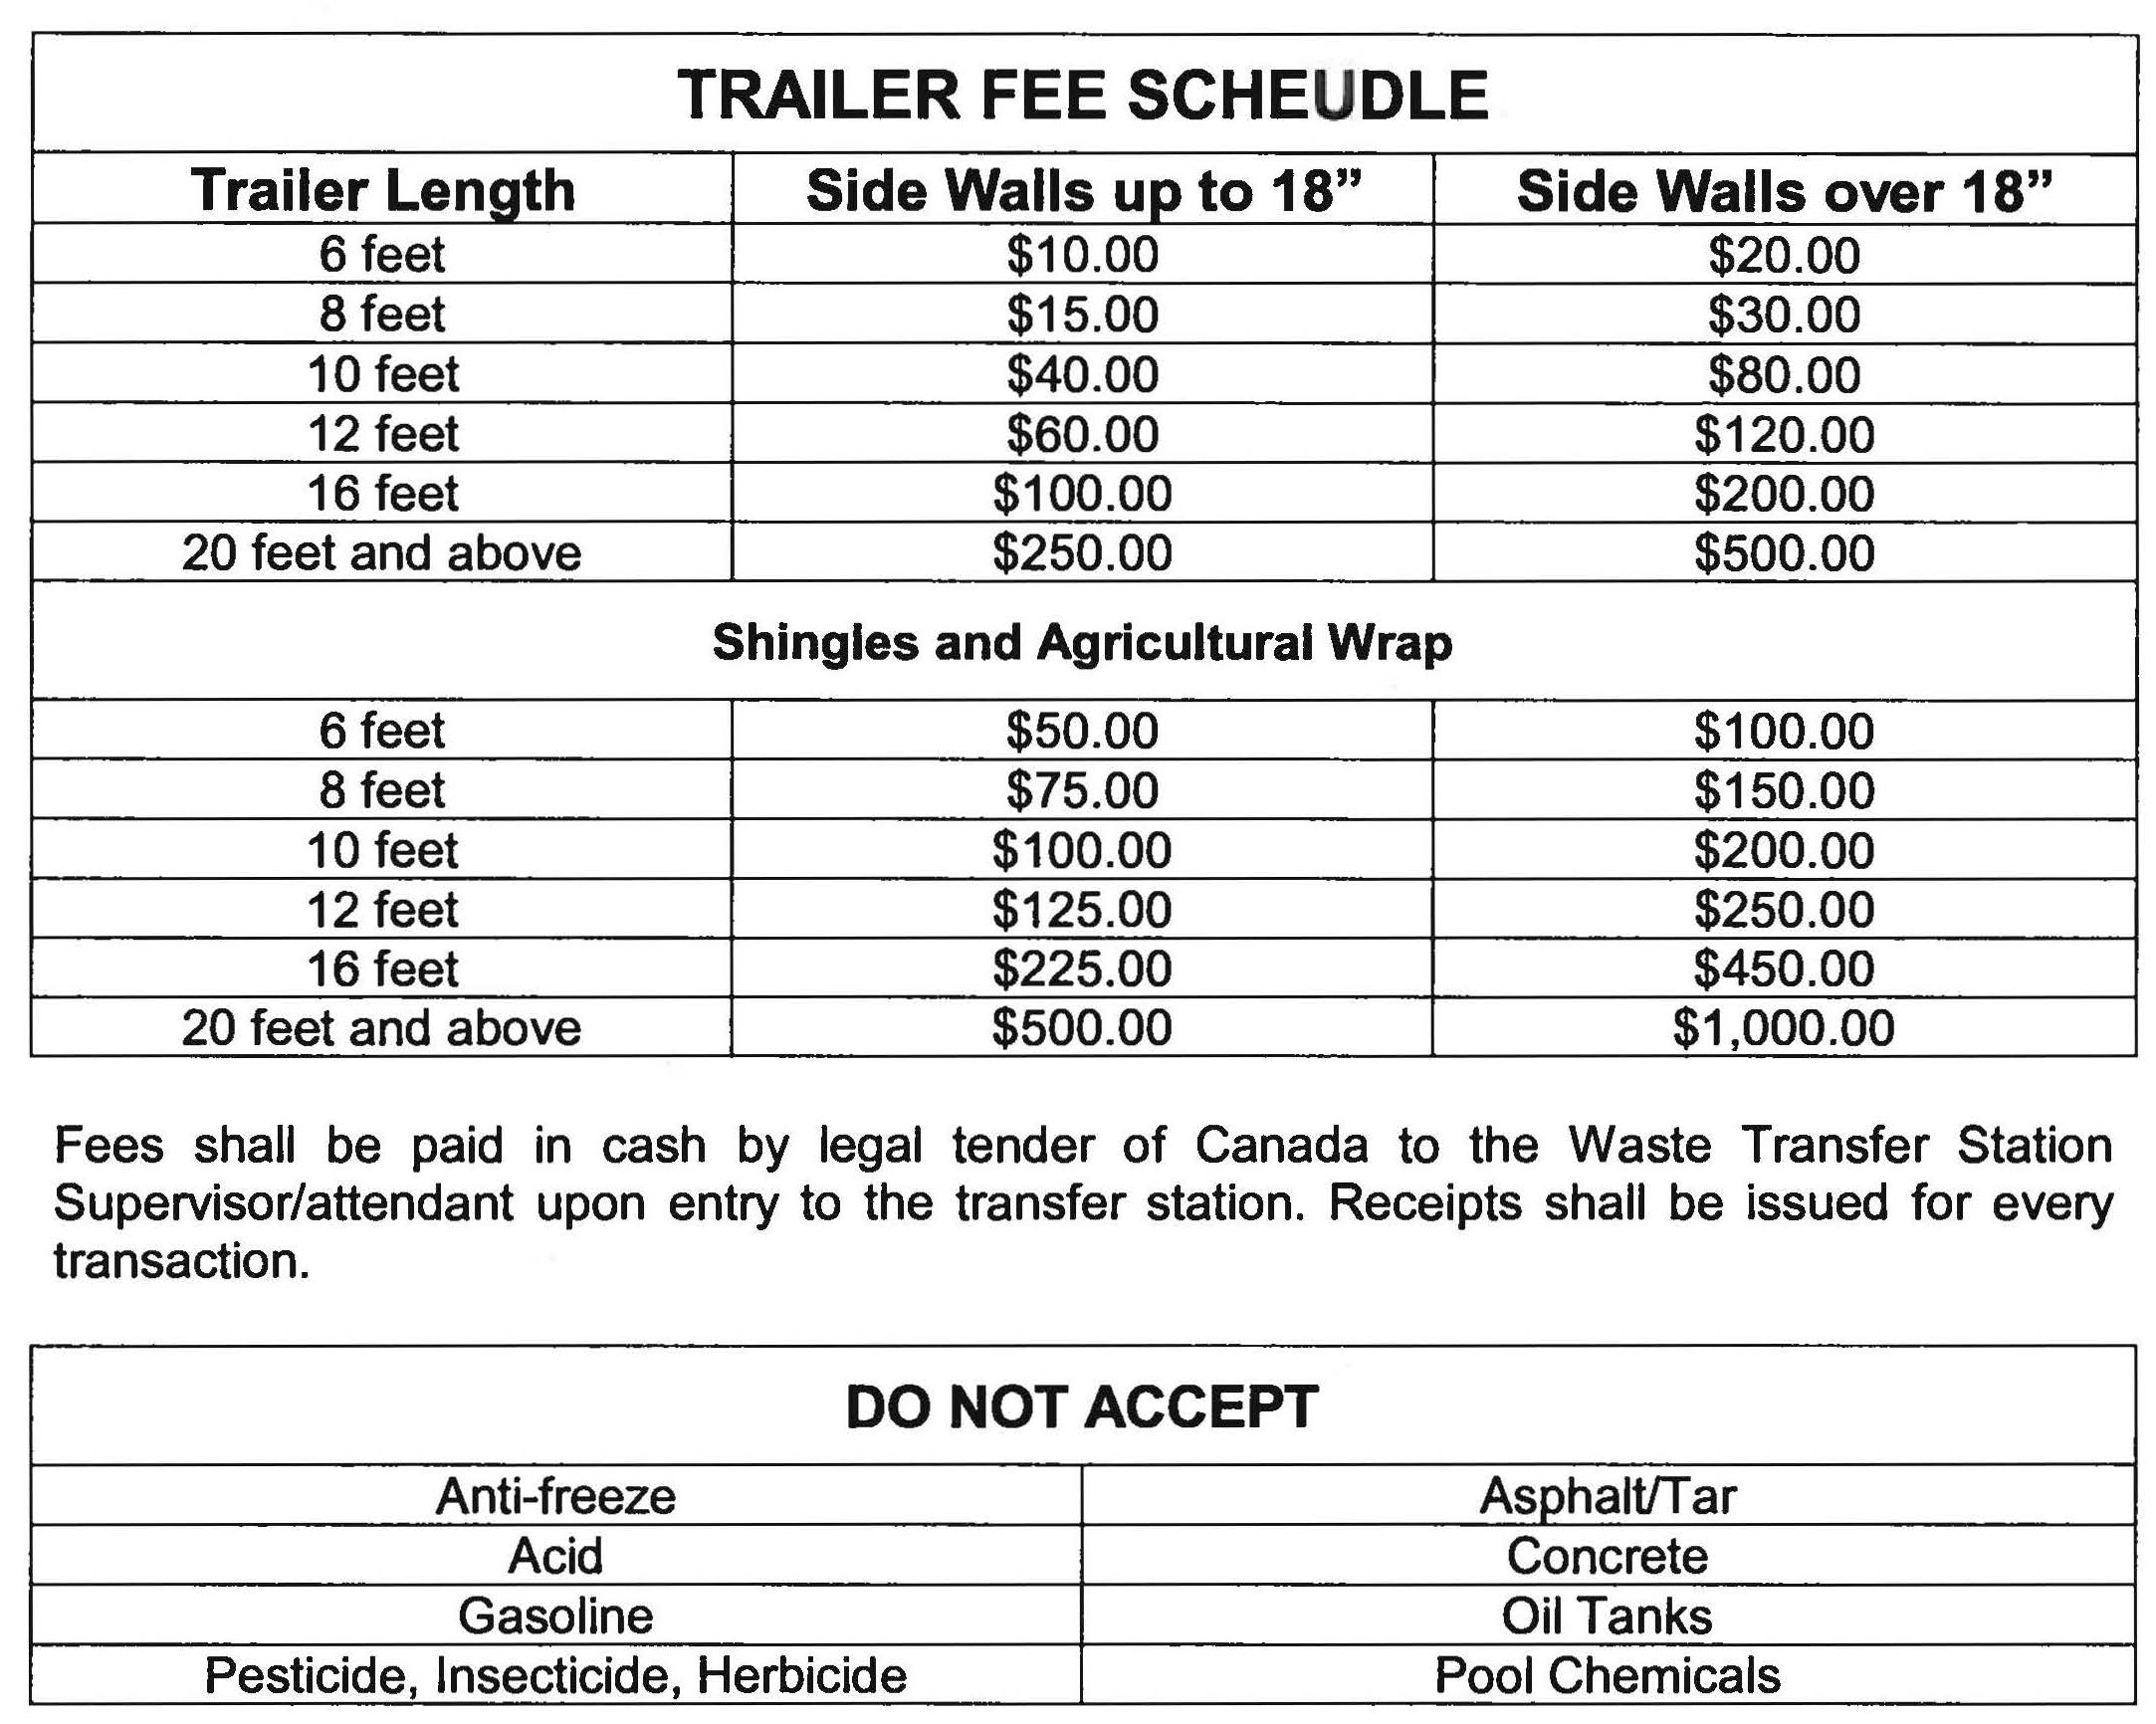 Trailor Fee Schedule and Do Not Accept Charts